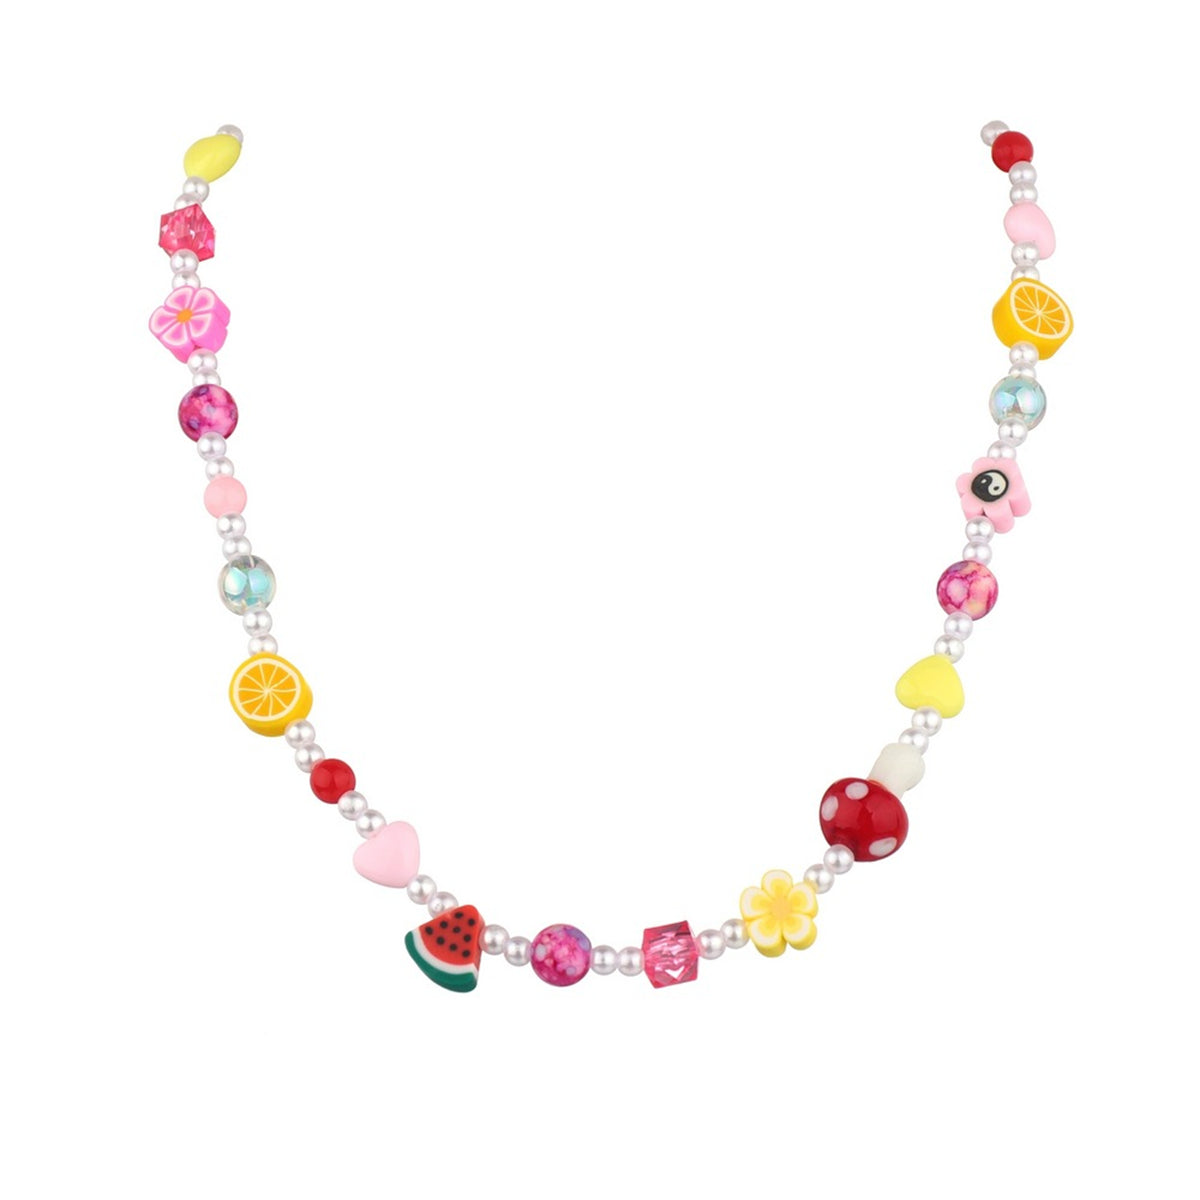 Crystal & Pearl Multicolor Polymer Clay Flower Fruit Station Necklace